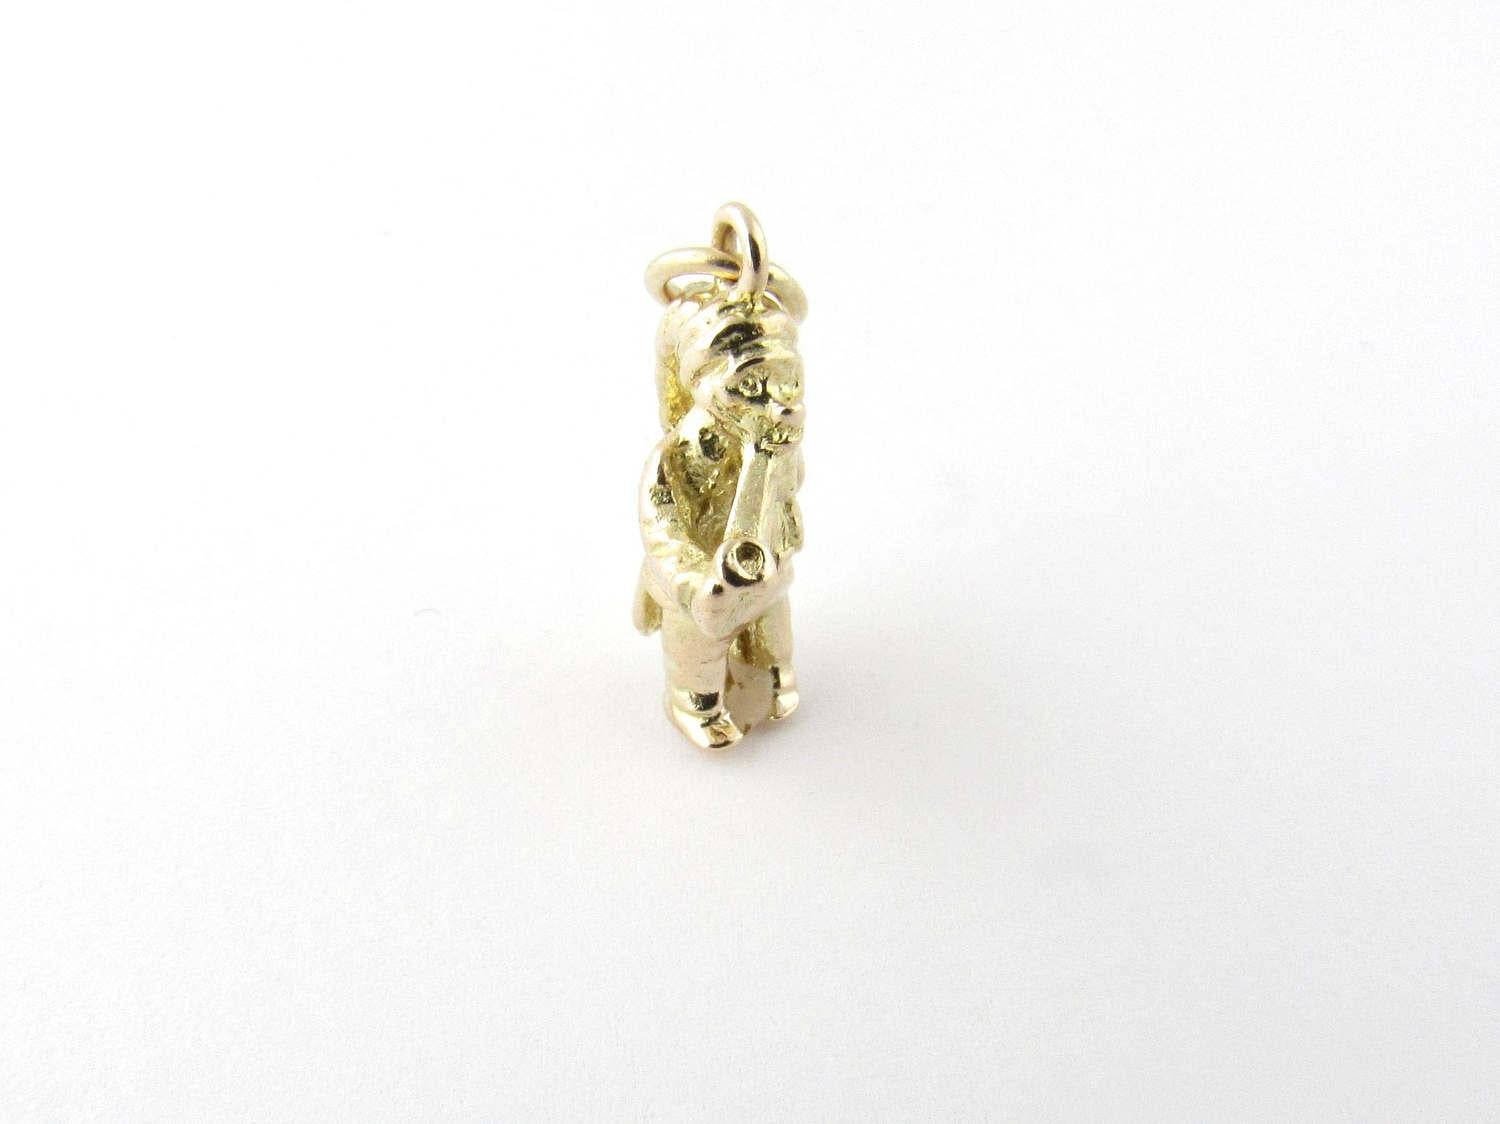 Vintage 10 Karat Yellow Gold Leprechaun Charm

Bring home the luck of the Irish! 

This 3D charms features a whimsical leprechaun smoking a pipe in meticulously detailed 10K gold. 

Size: 20 mm x 12 mm (actual charm) 

Weight: 2.5 dwt. / 4.0 gr.